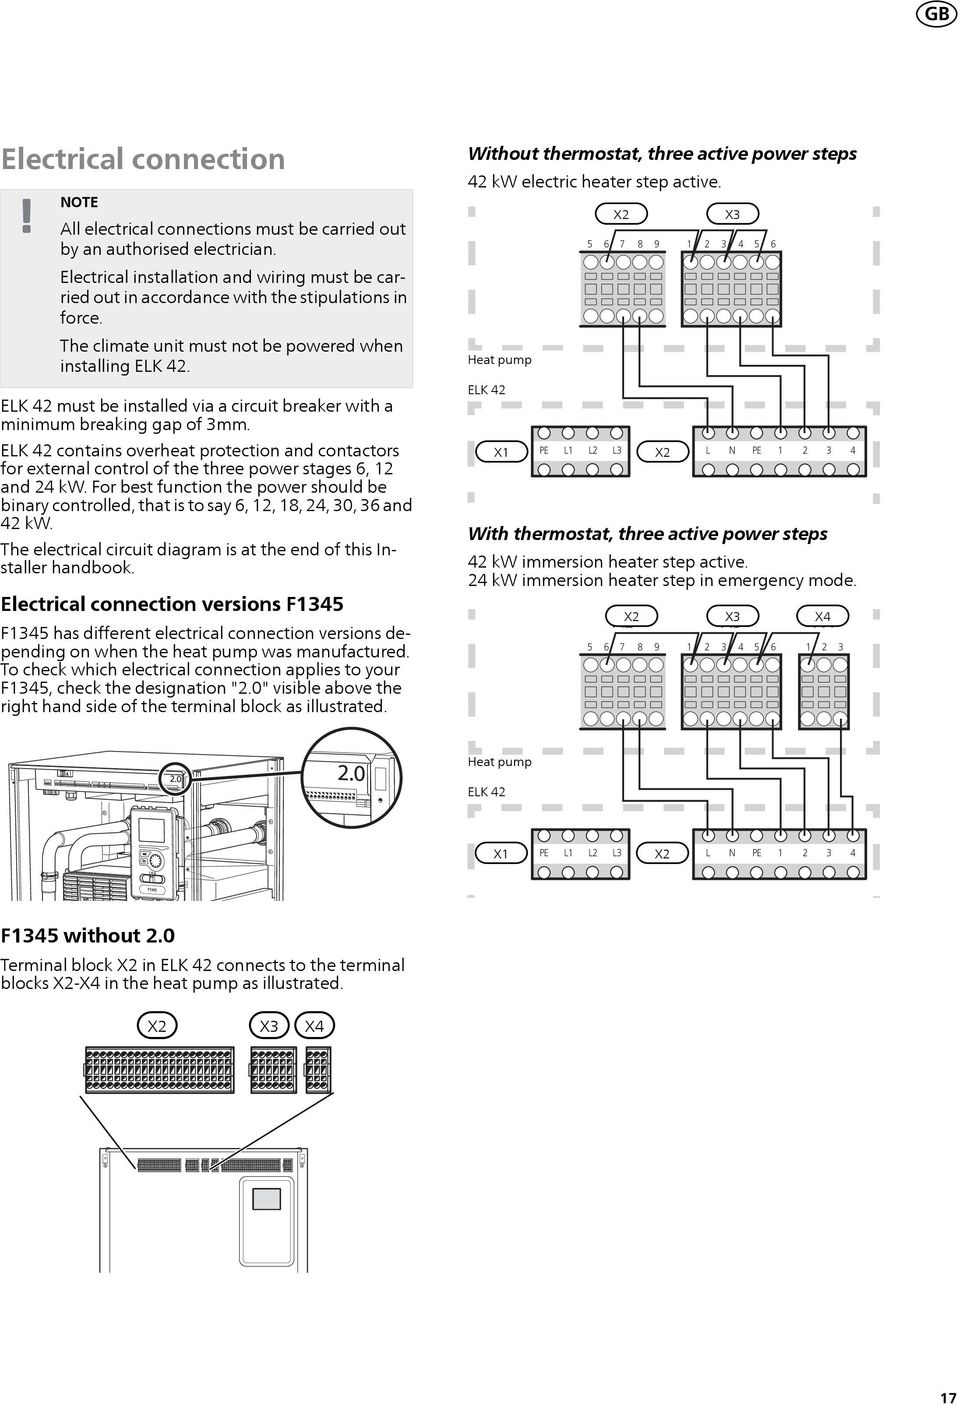 must be installed via a circuit breaker with a minimum breaking gap of 3mm. contains overheat protection and contactors for external control of the three power stages 6, 12 and 24.